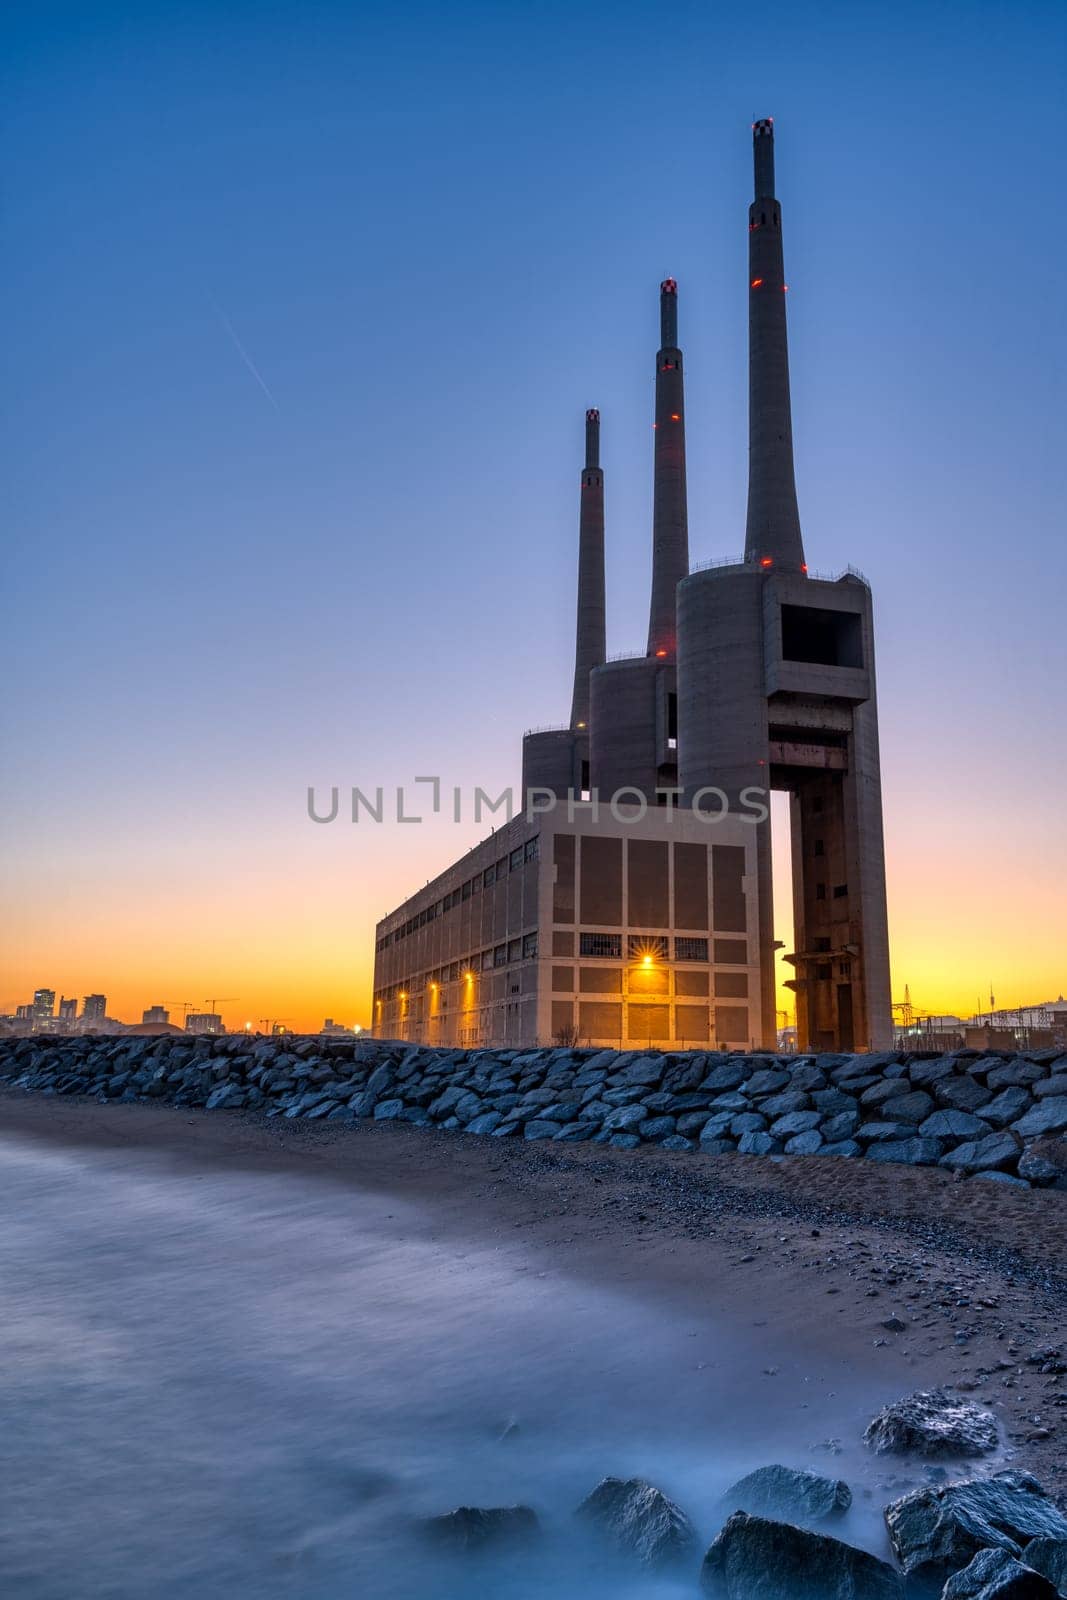 The decommissioned thermal power station at Sant Adria by elxeneize